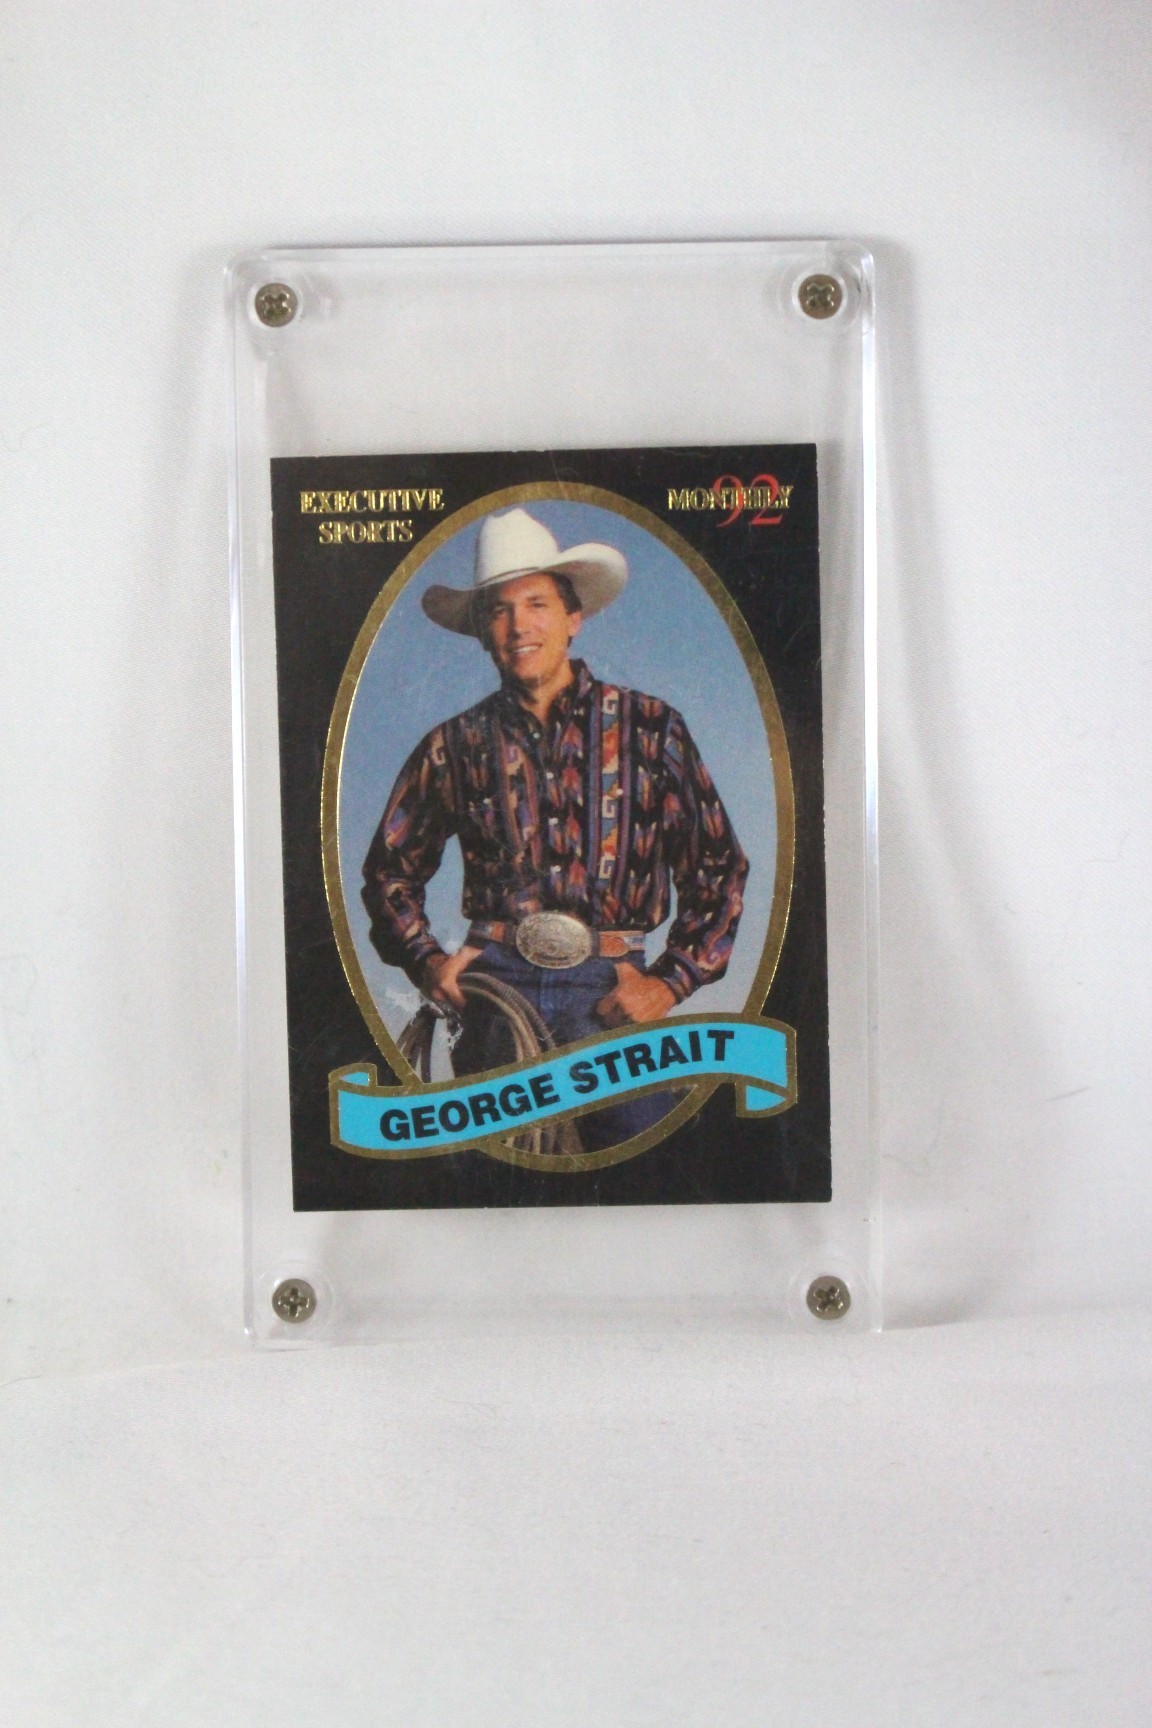 George Strait – trading card “Executive Sports Monthly” ‘92